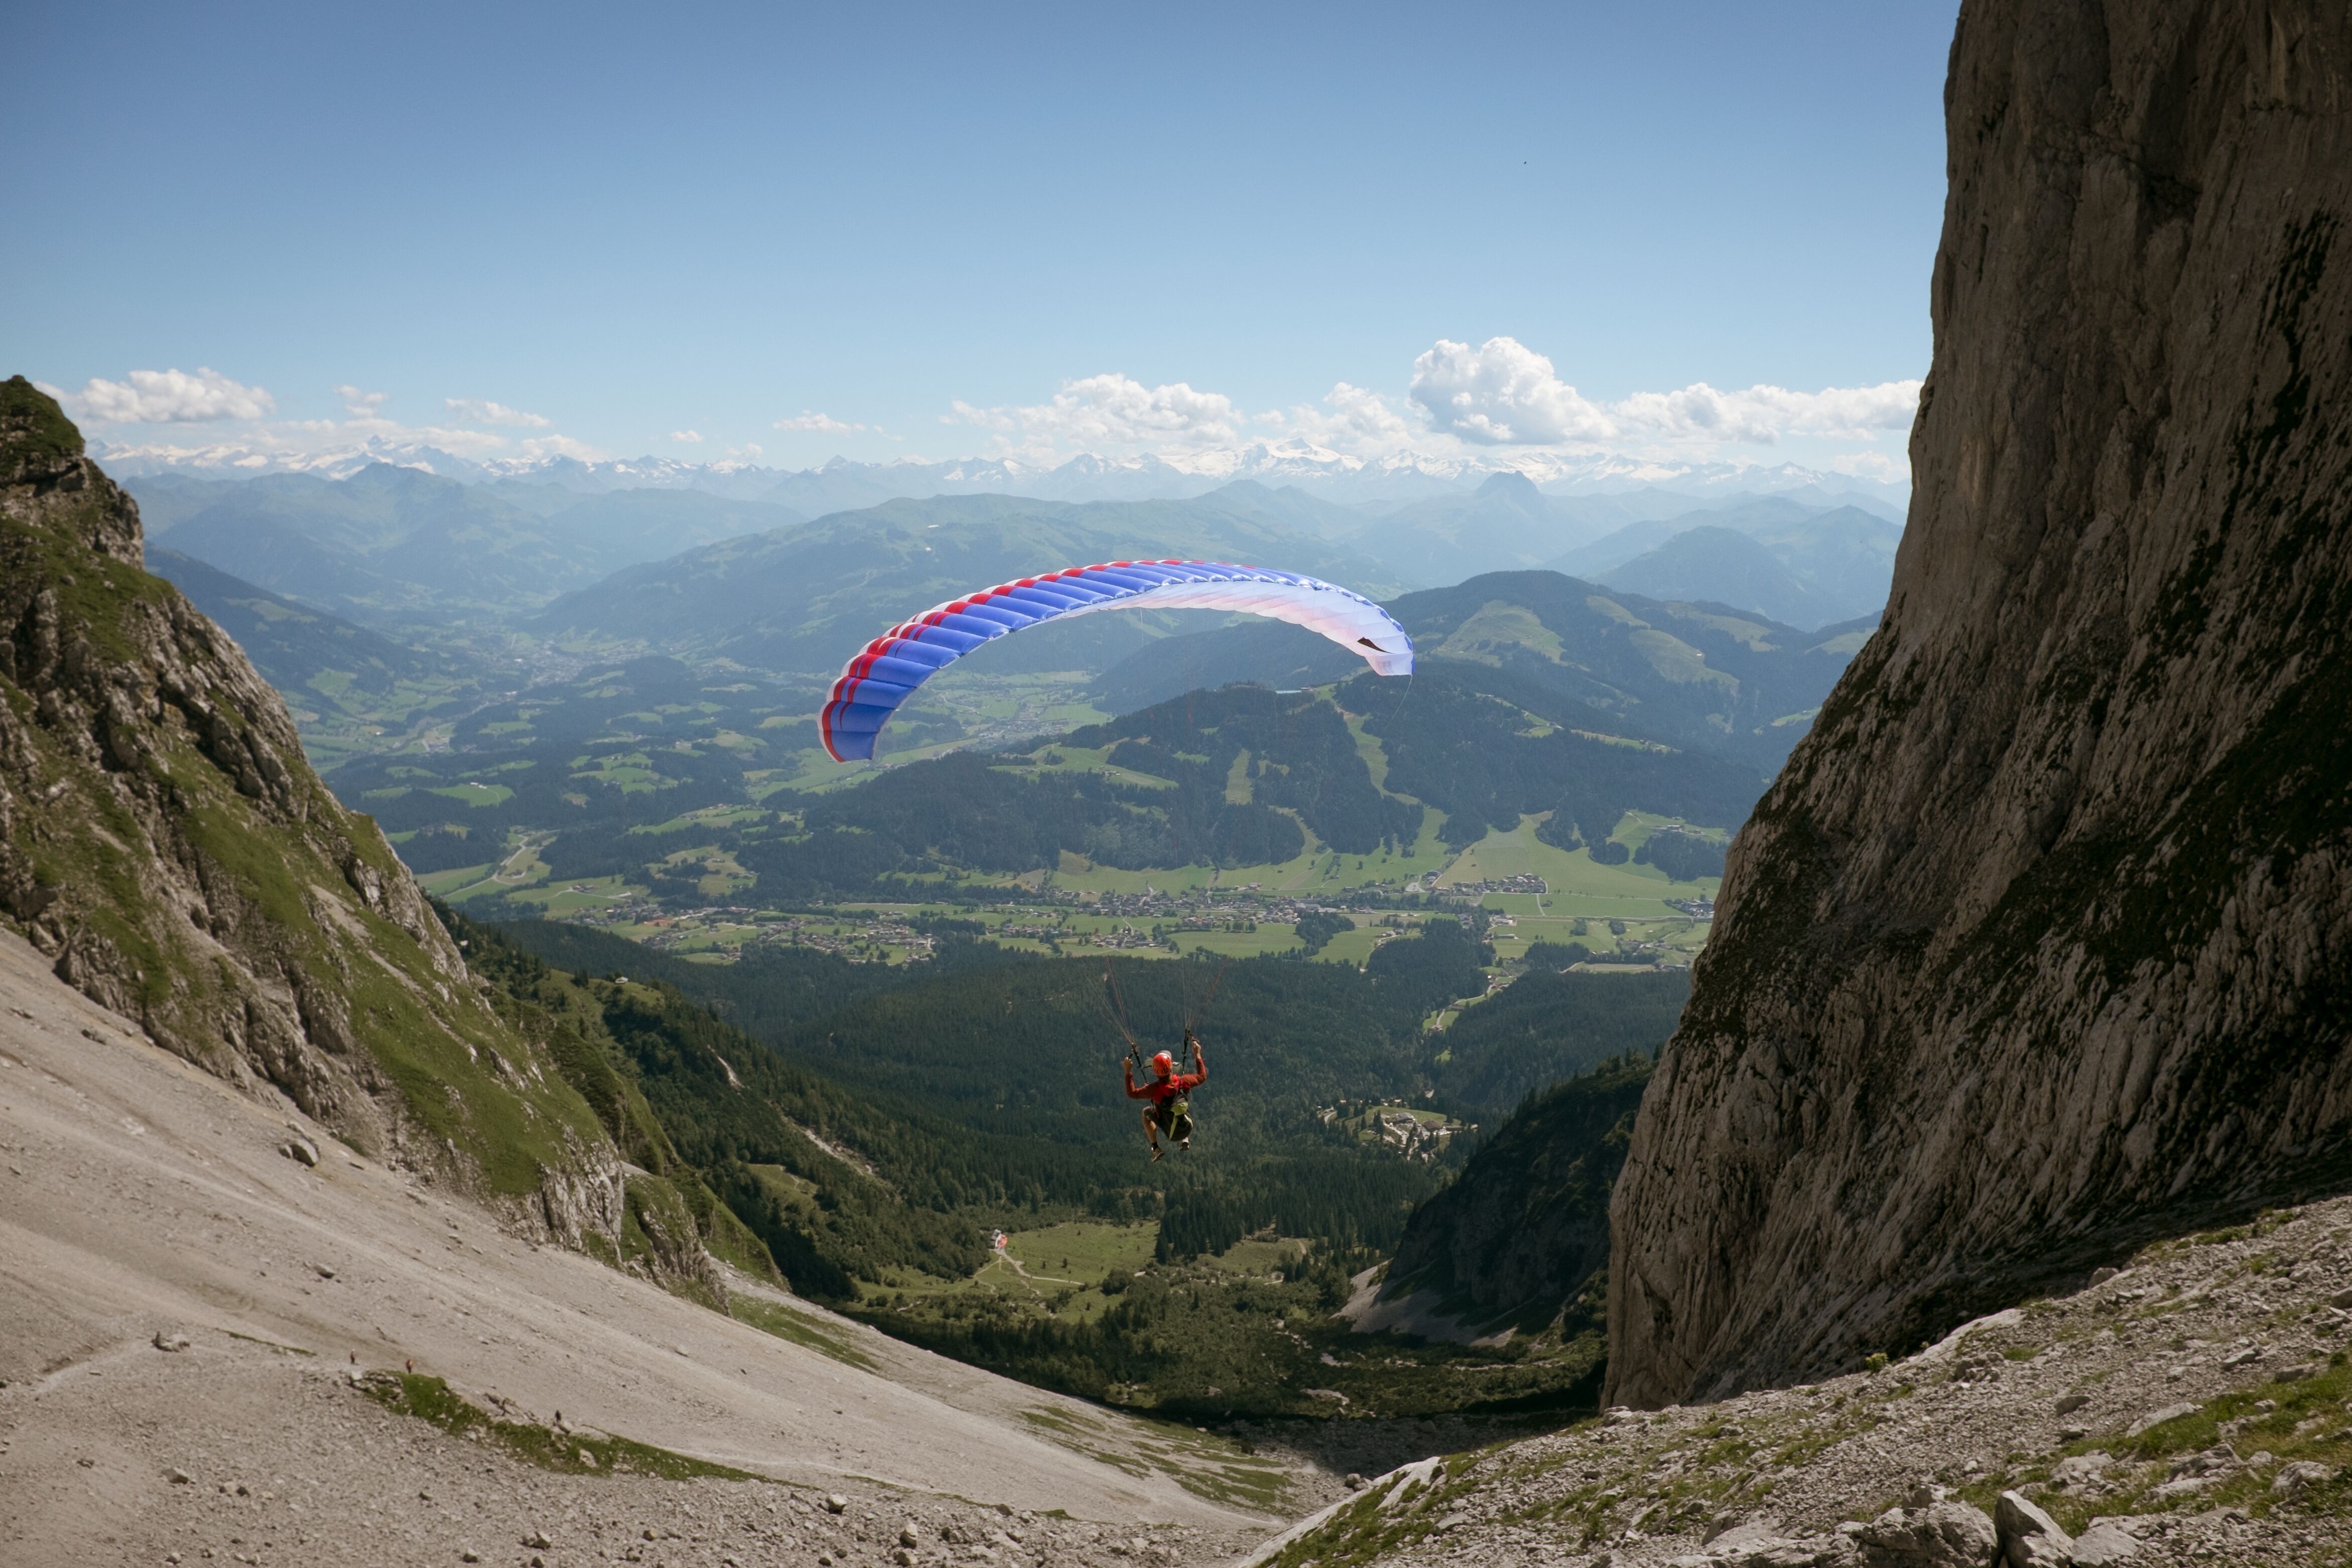 Skydiver is head down flying over a spectacular mountain scenery